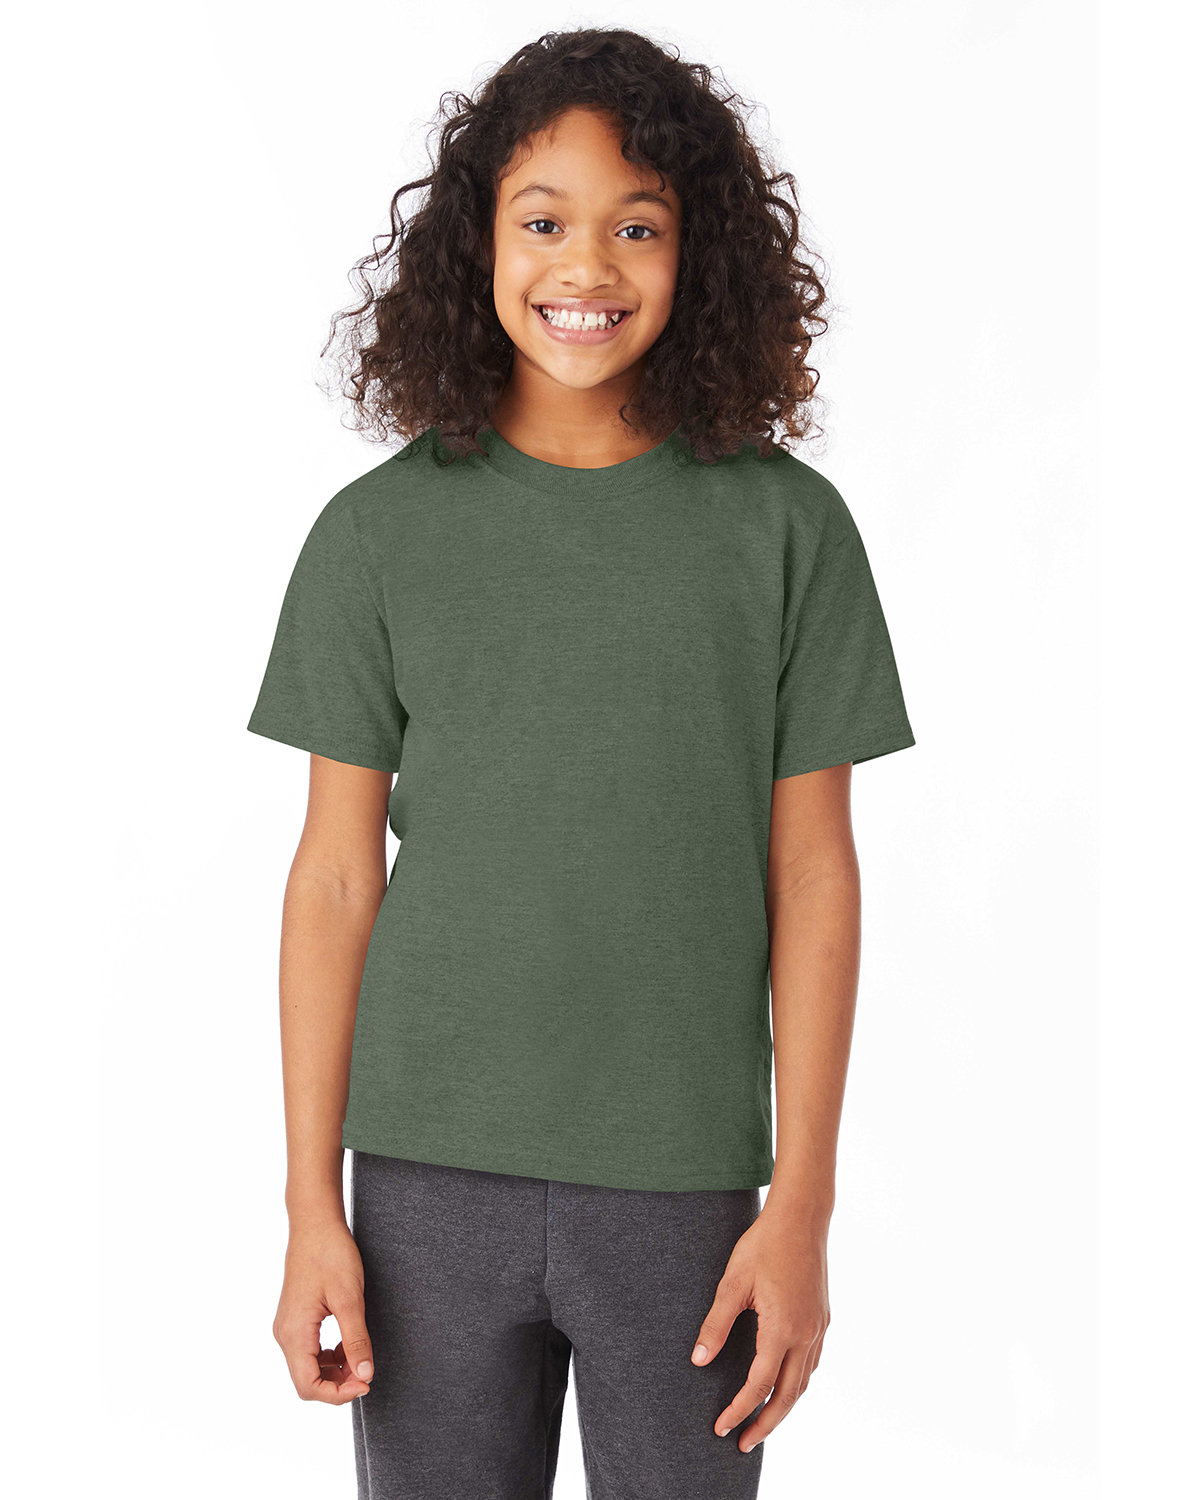 Hanes Youth 50/50 T-Shirt HEATHER GREEN 